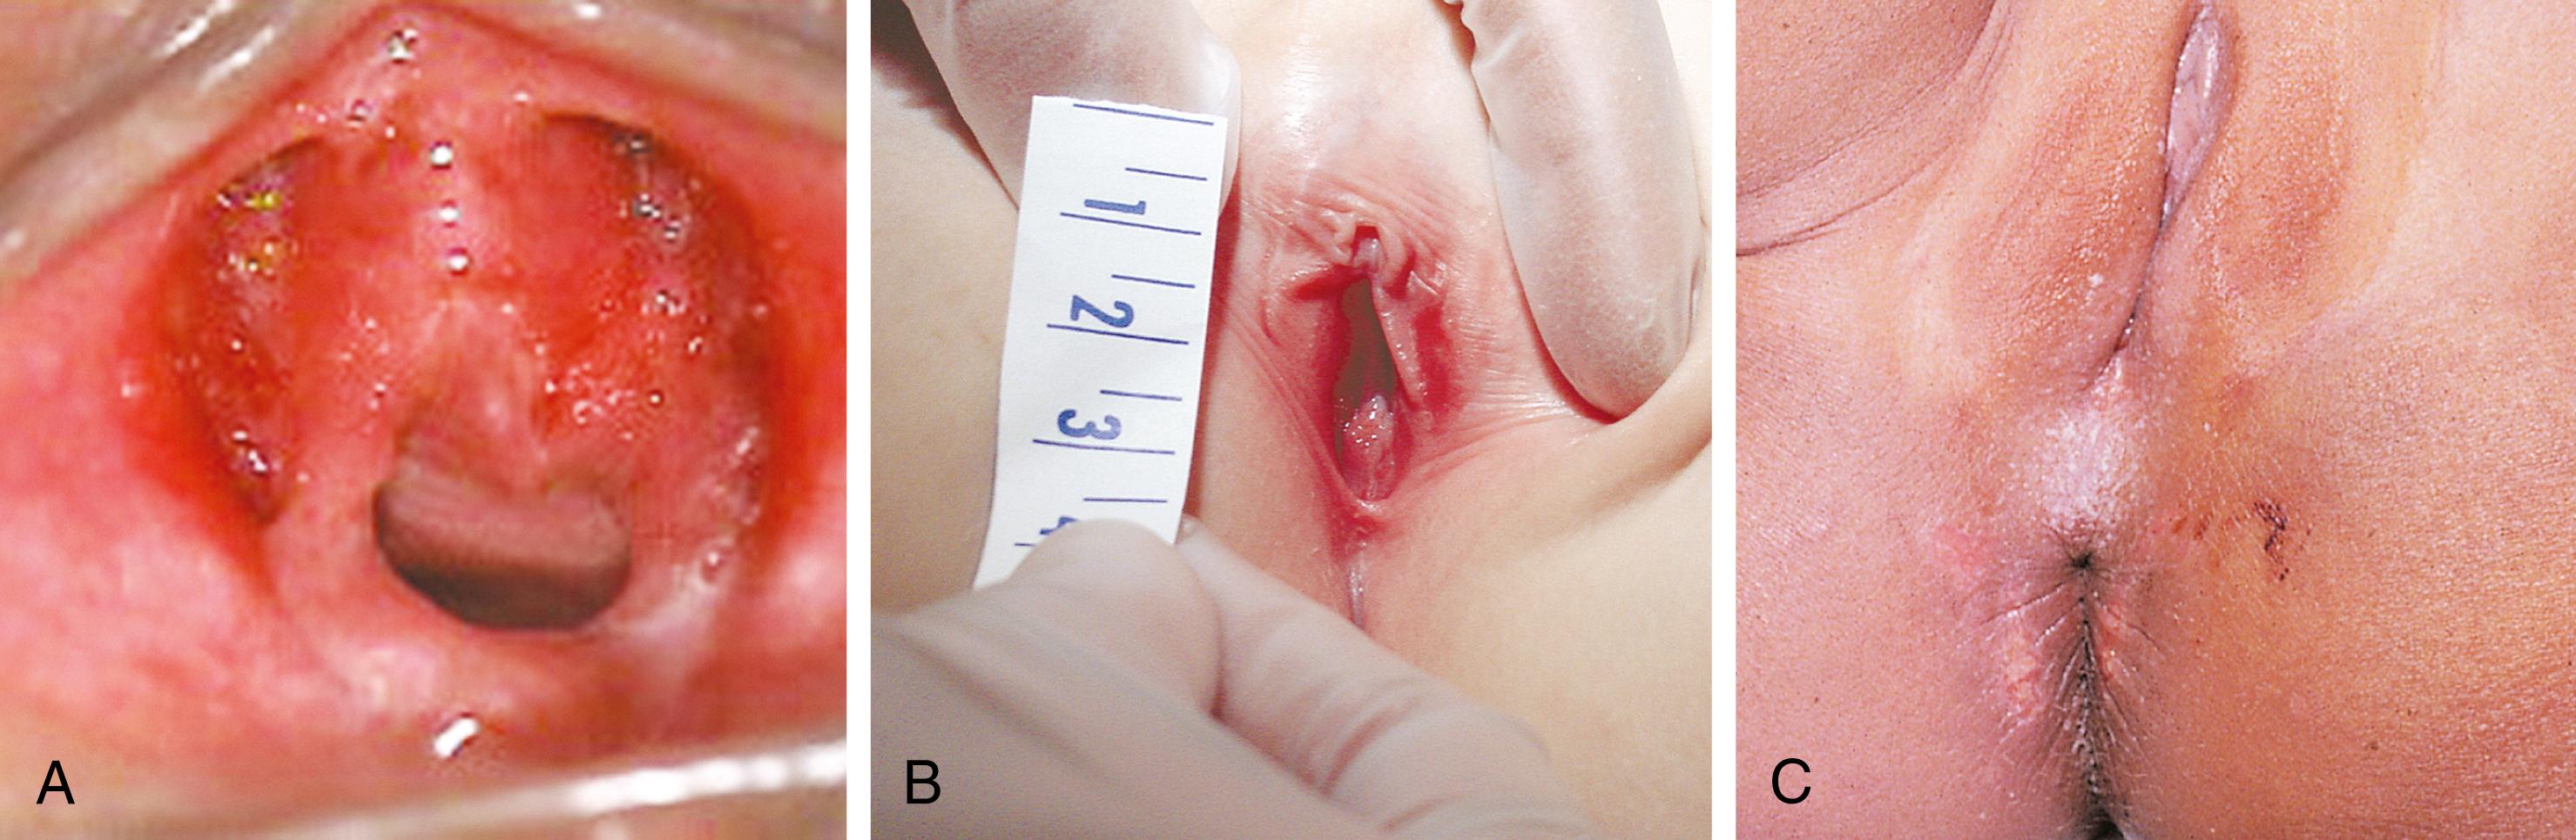 Fig. 19.14, Superficial blunt trauma. (A) Superficial abrasions and bruising are seen anteriorly on either side of the clitoris and urethra in a 3-year-old who presented with dysuria. (B) In another toddler, a superficial abrasion/laceration is seen between the left labia minora and majora after a straddle injury. (C) These healing superficial abrasions involving the posterior fourchette and perianal area were the result of sexual abuse.